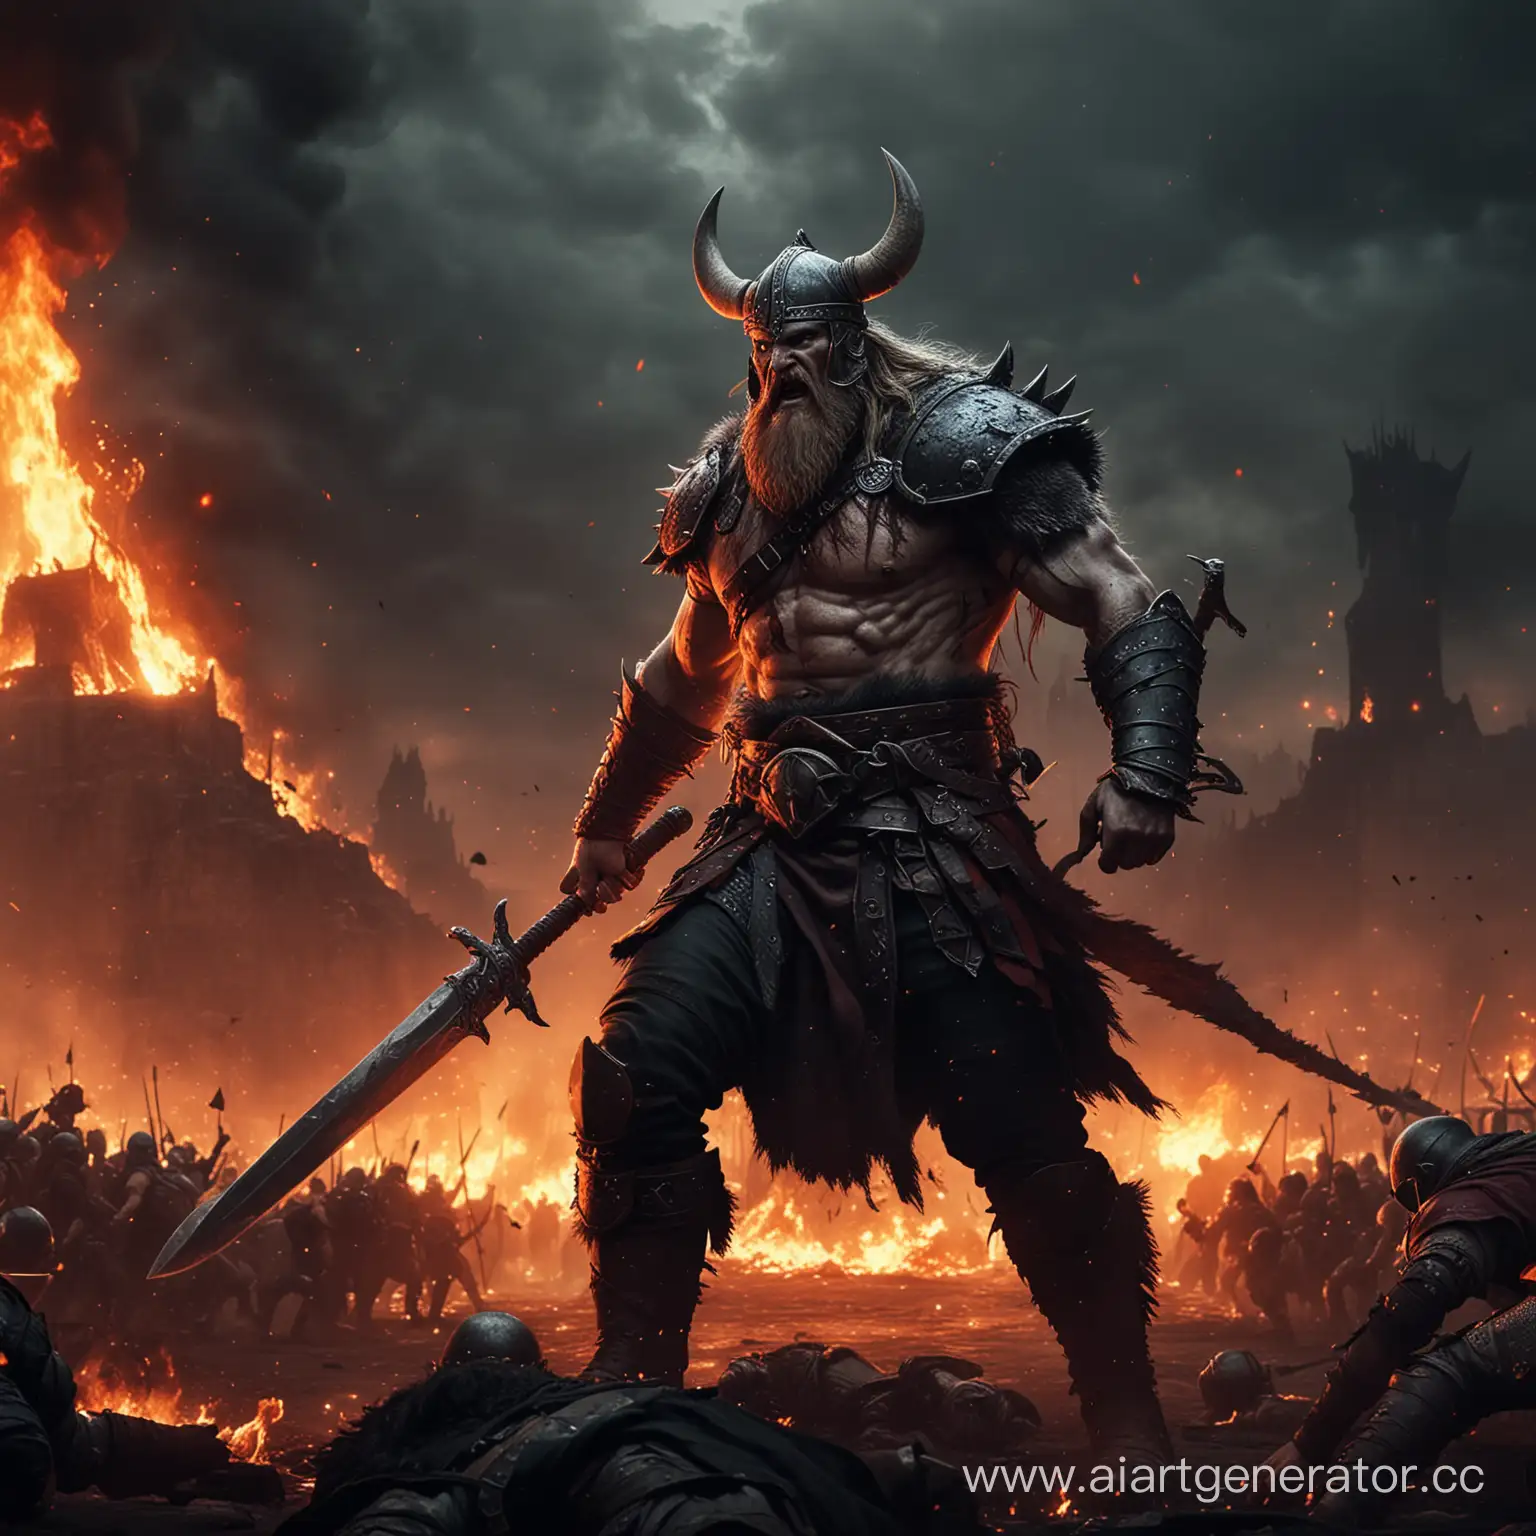 Epic-Viking-Battle-with-Fiery-Flames-and-Intense-Blood-Splatters